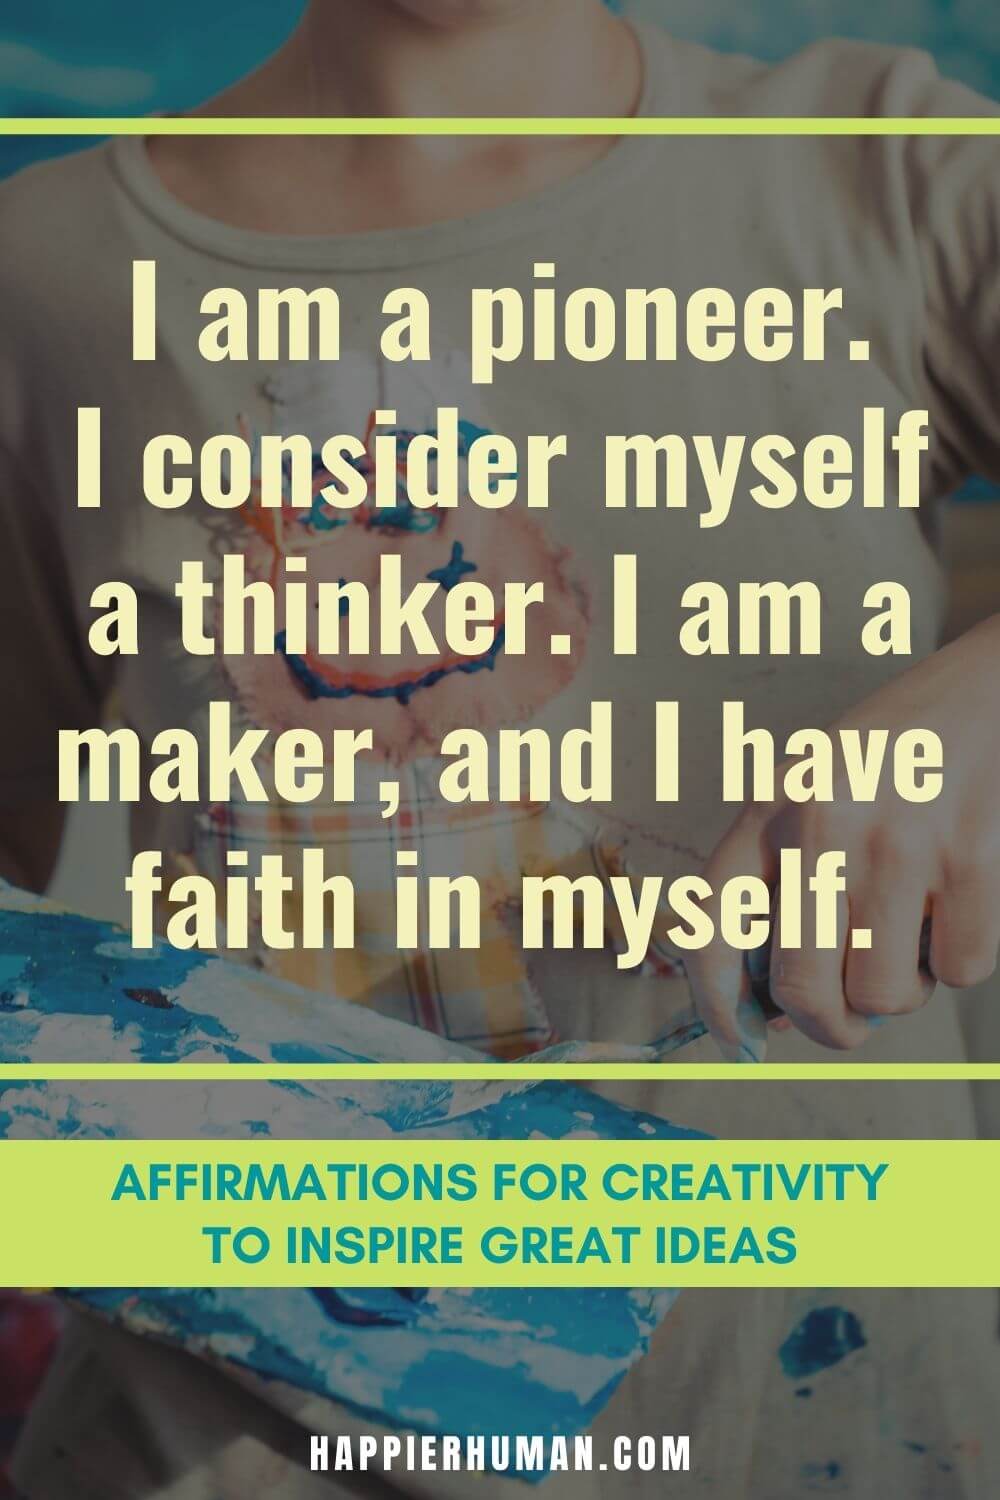 Affirmations for Creativity - I am a pioneer. I consider myself a thinker. I am a maker, and I have faith in myself. | affirmations for content creators | affirmations for knowledge | nurturing affirmations